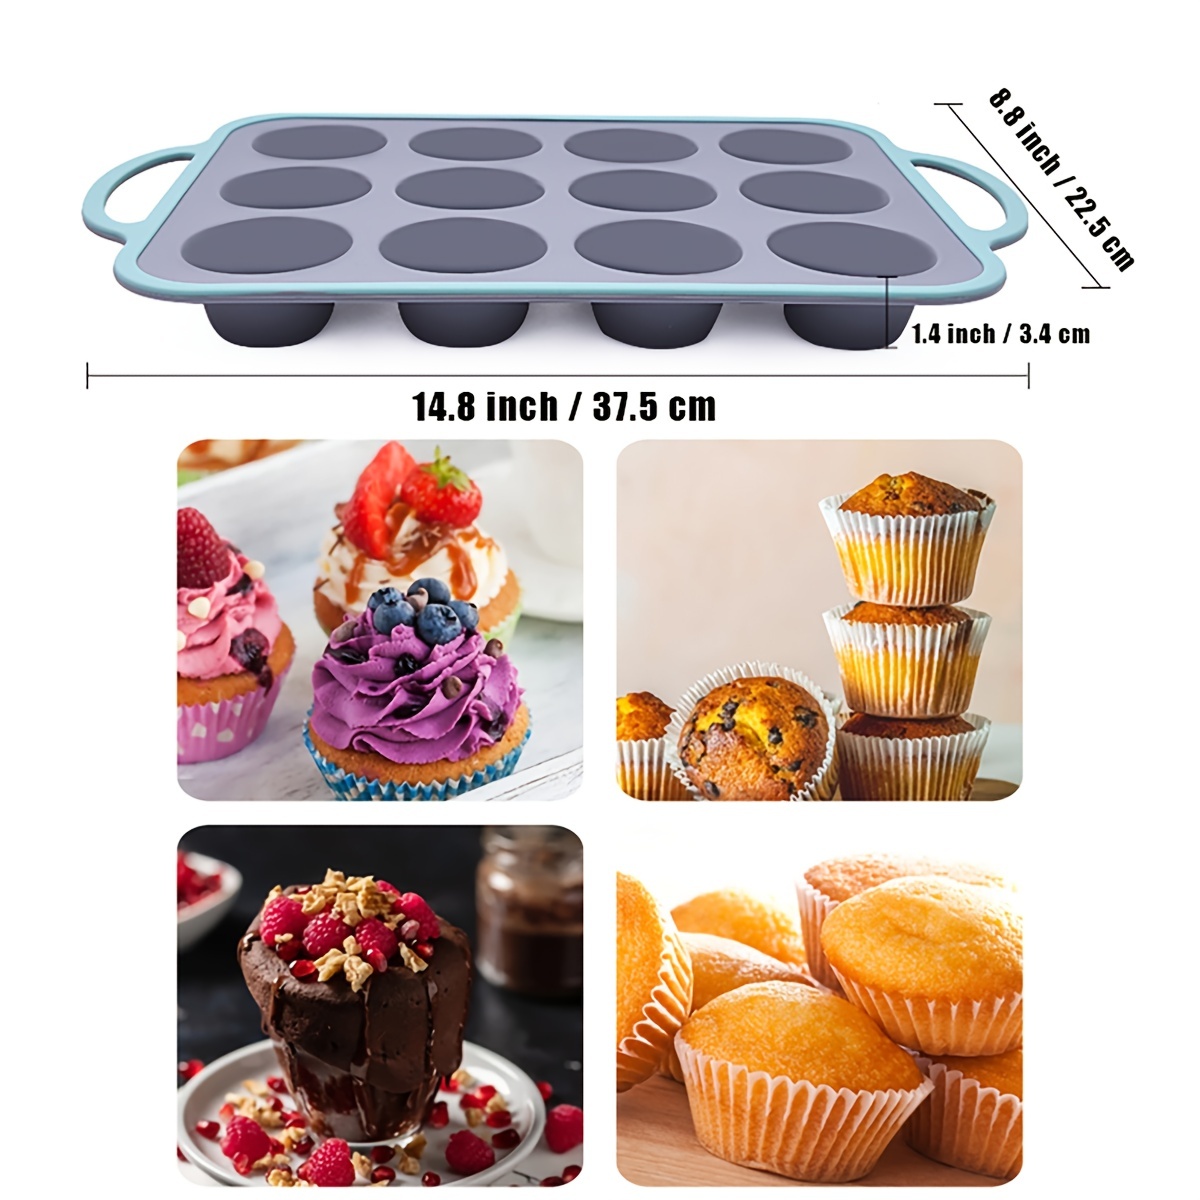 Eoonfirst 12 Cups Silicone Muffin Pan - Nonstick Bpa Free Cupcake